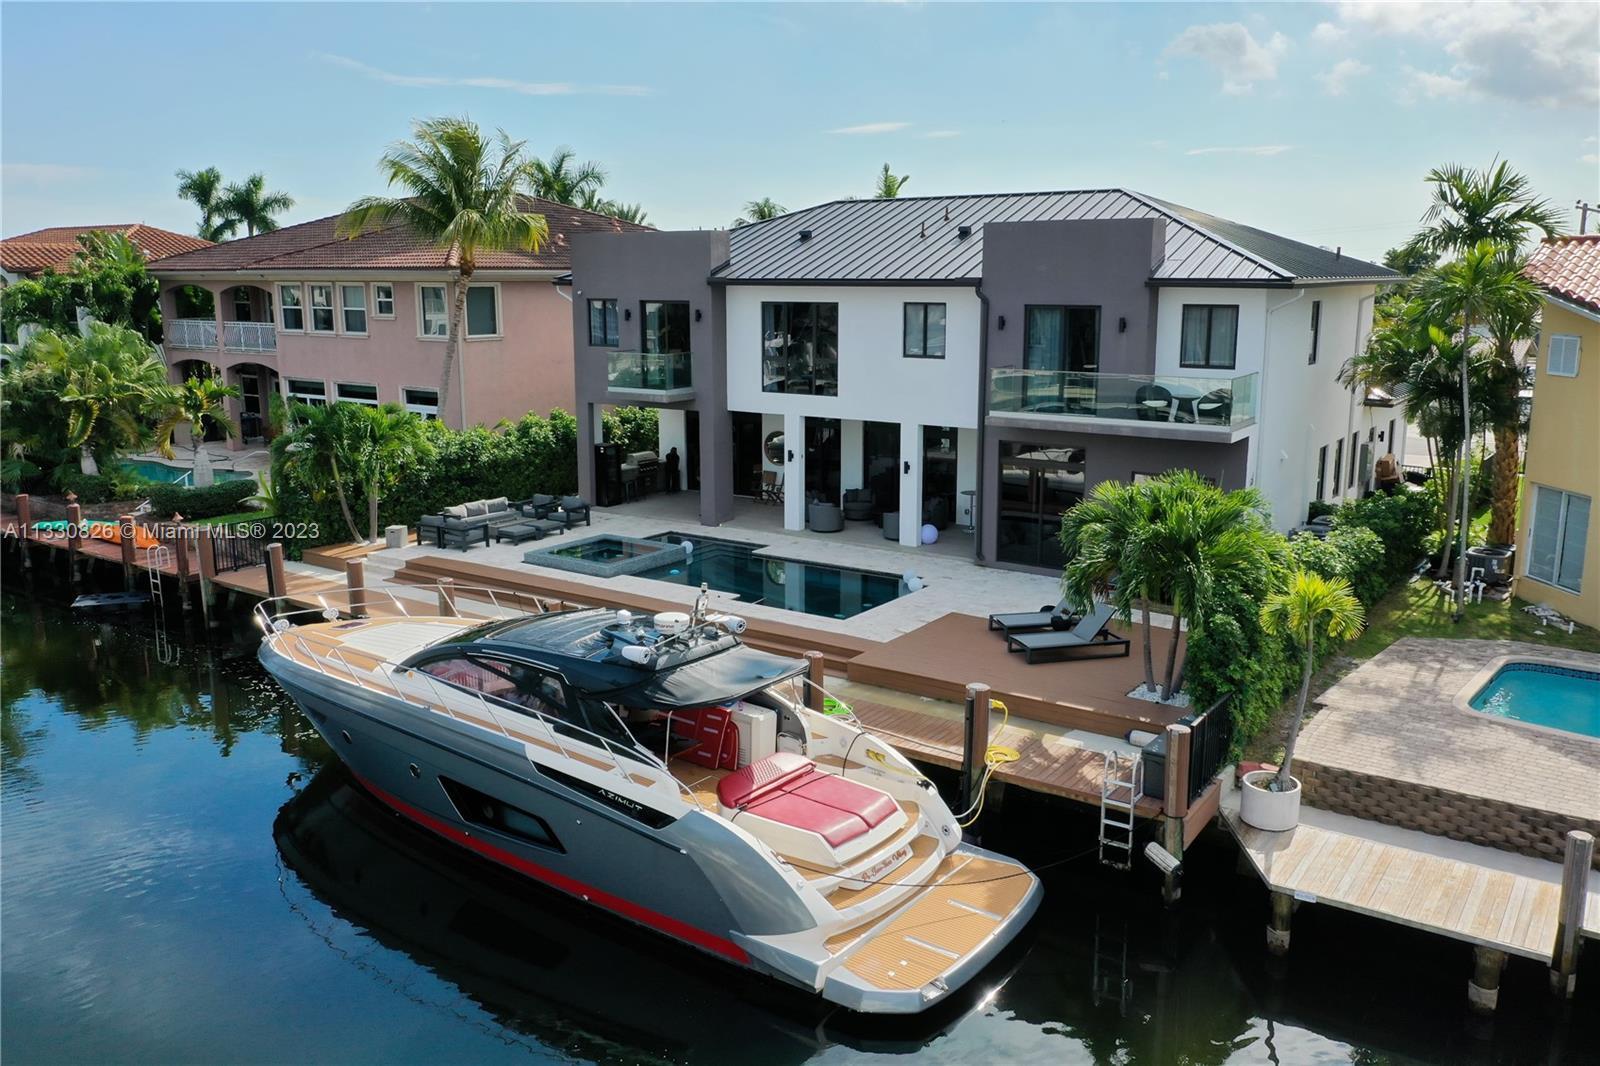 BOATERS LOVERS! 80ft waterfront w/ ocean access, NO FIXED BRIDGES. Absolutely spectacular 5-bed/6-ba